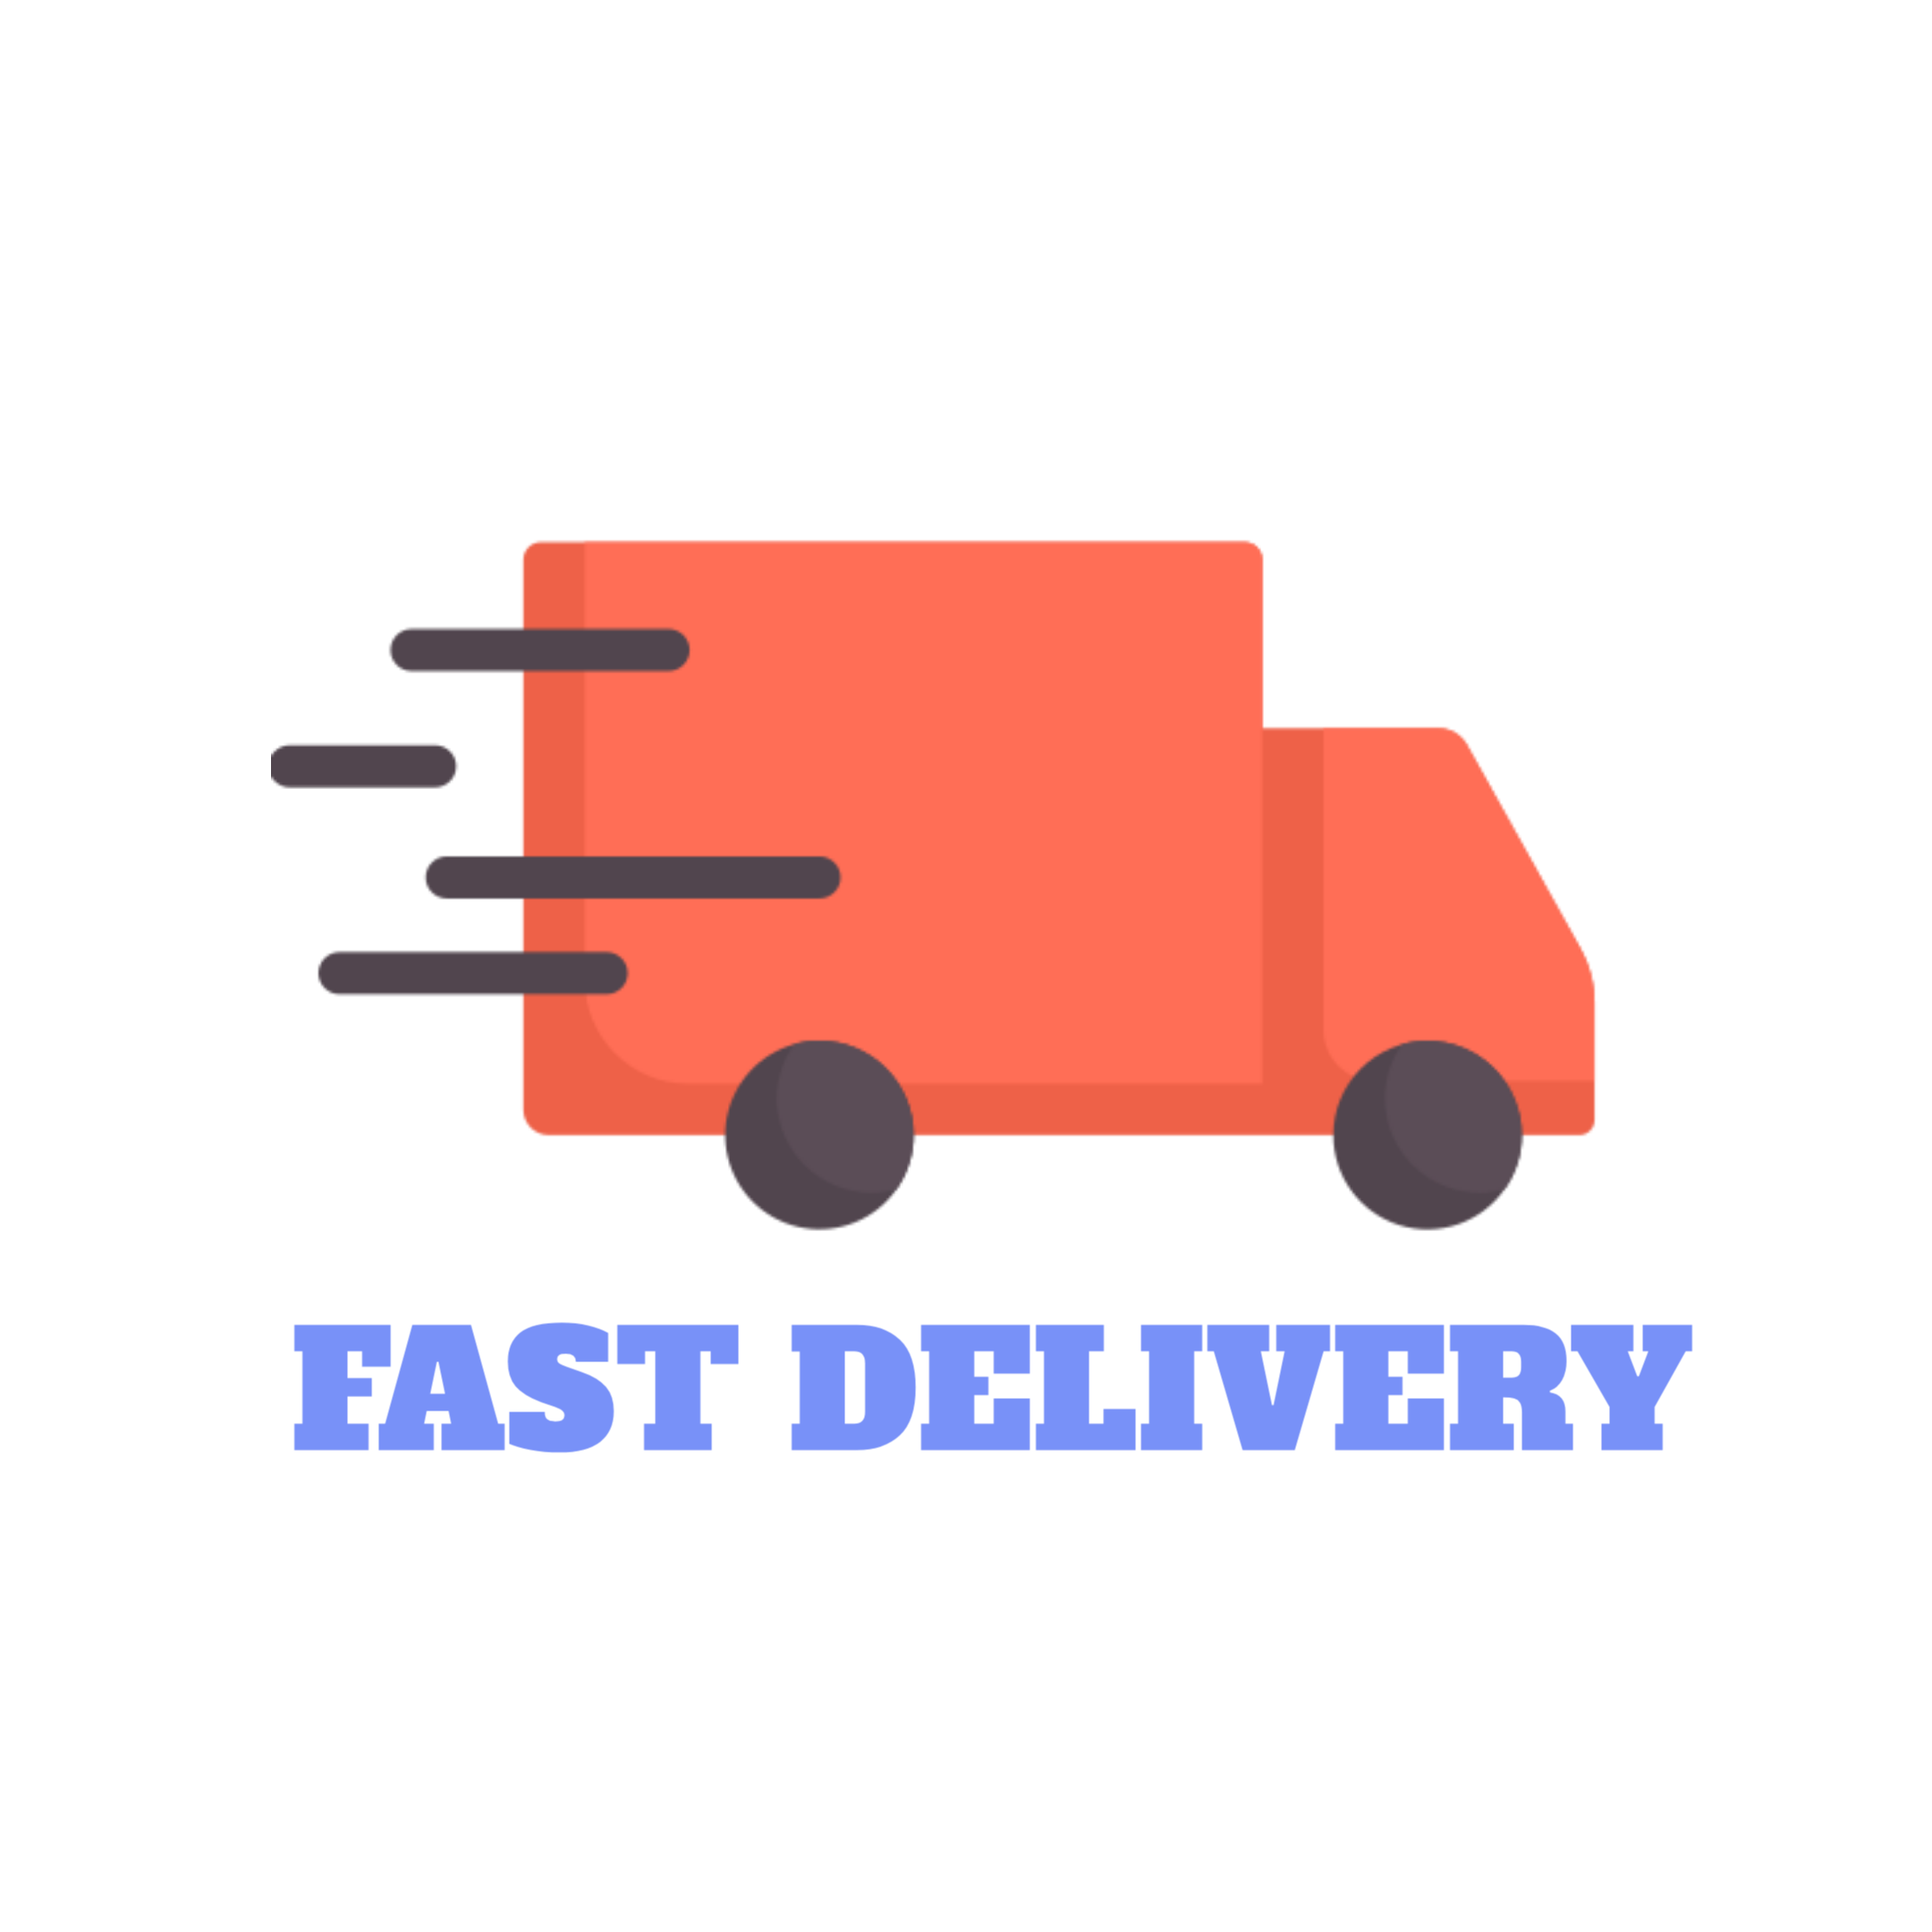 Shiftick fast delivery image